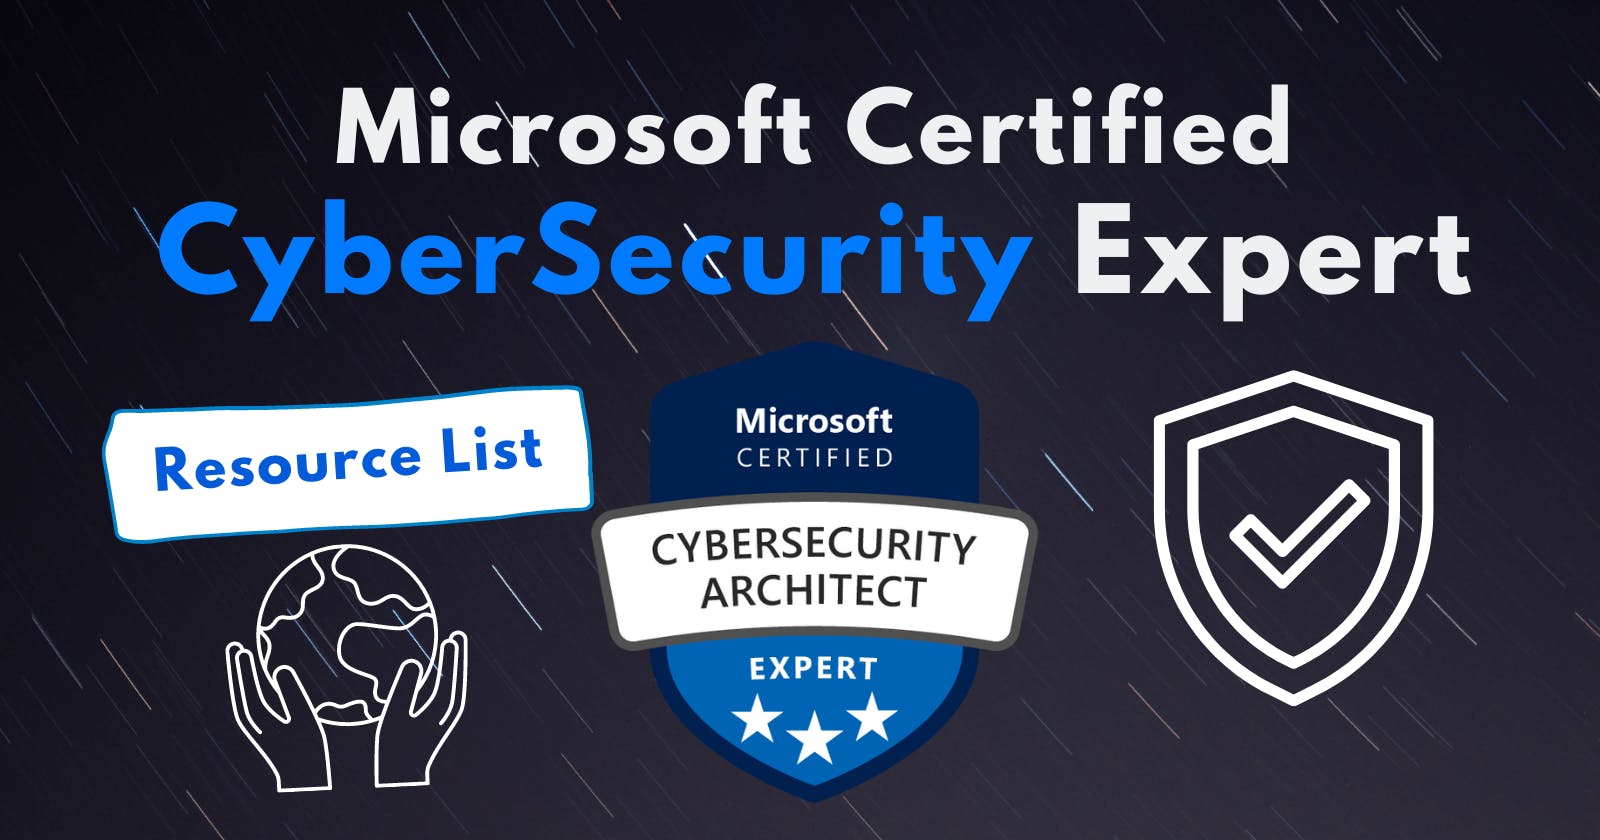 Microsoft Certified:CyberSecurity Architect Expert | Resources